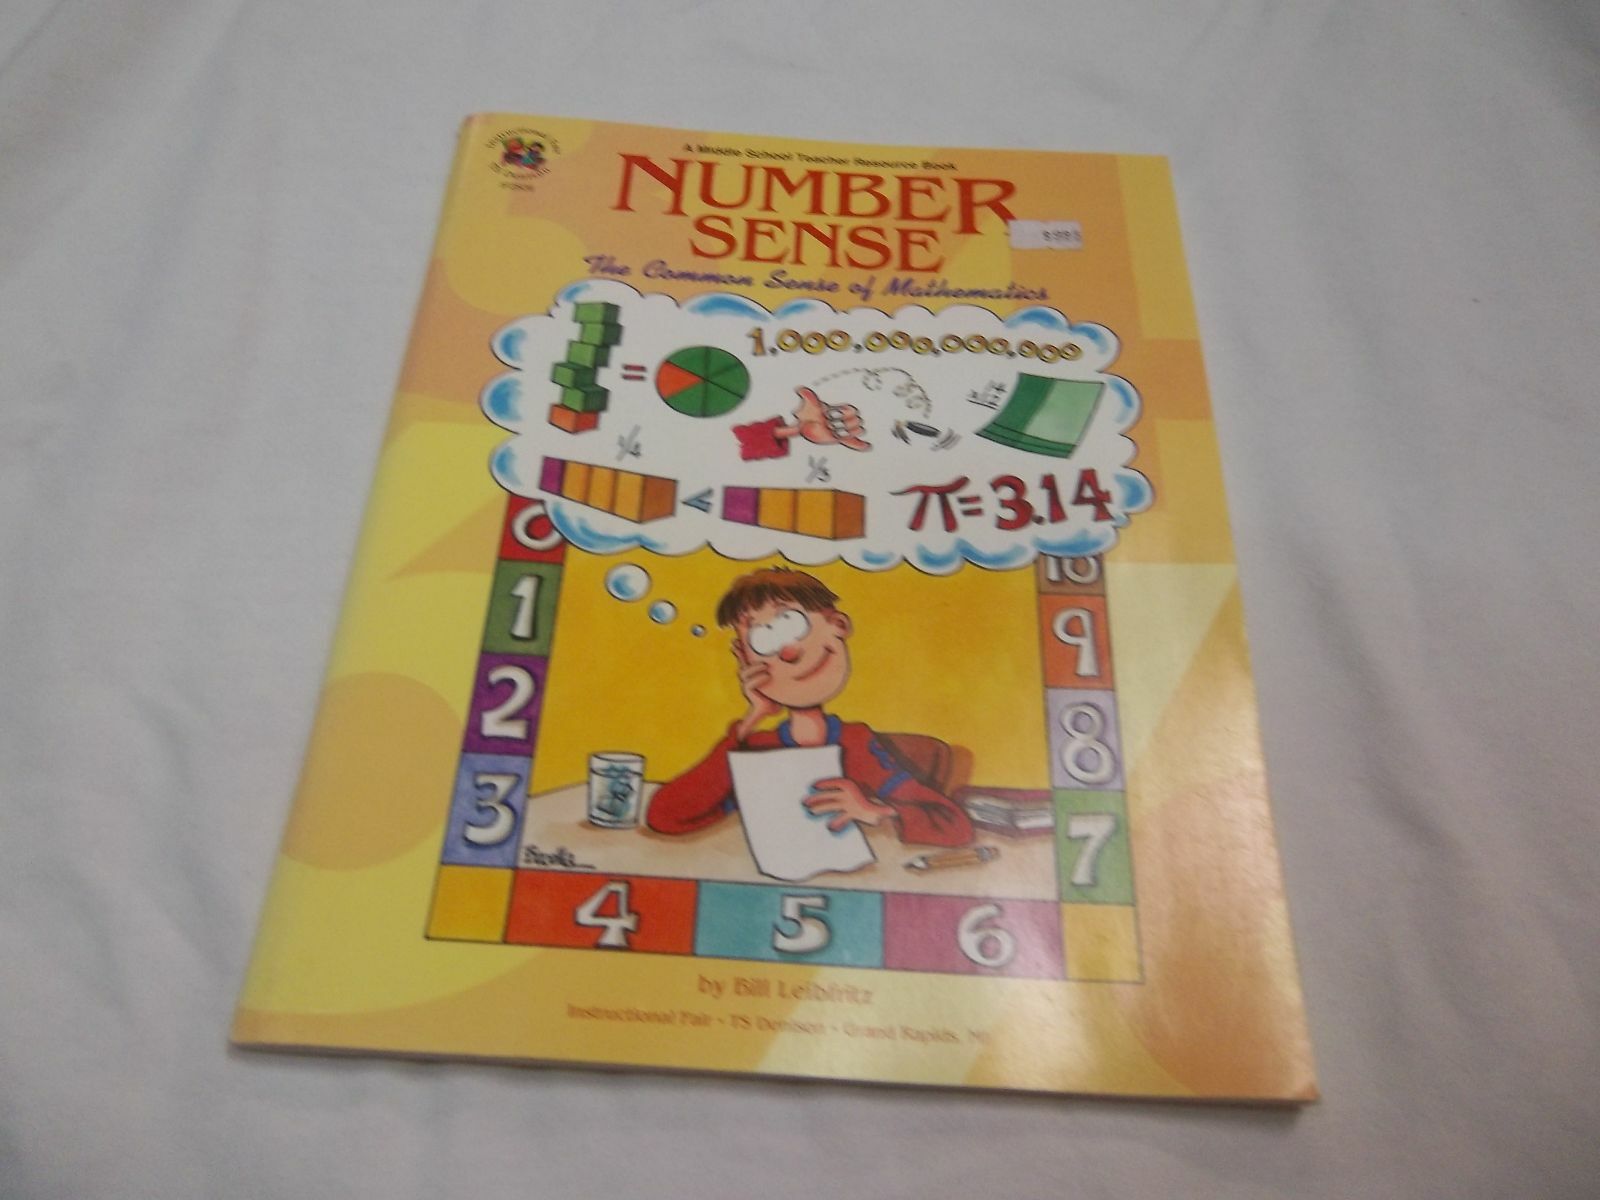 IF2526 NUMBER SENSE -A MIDDLE SCHOOL TEACHER RESOURCE BOOK(PAPERBACK)